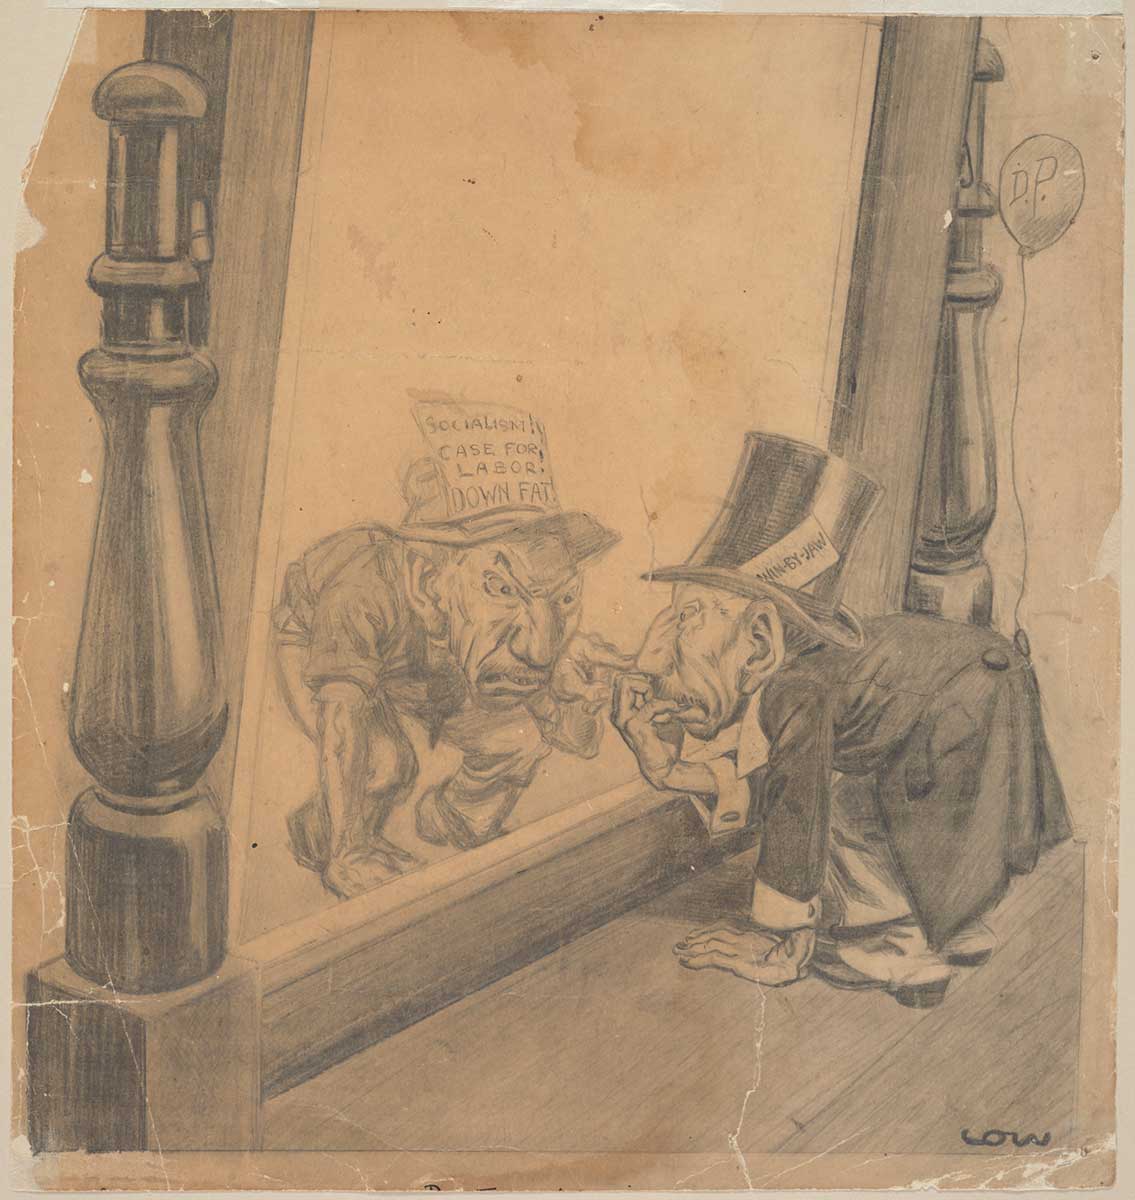 Pencil drawing depicting Prime Minister, Mr William (Billy) Hughes, gazing into an oversized mirror. He is wearing a top hat and a coat, while his reflection wears rough working clothes and a cap to which is attached a note: 'Socialism! Case for Labor! Down Fat!' The reflection points an accusing finger.